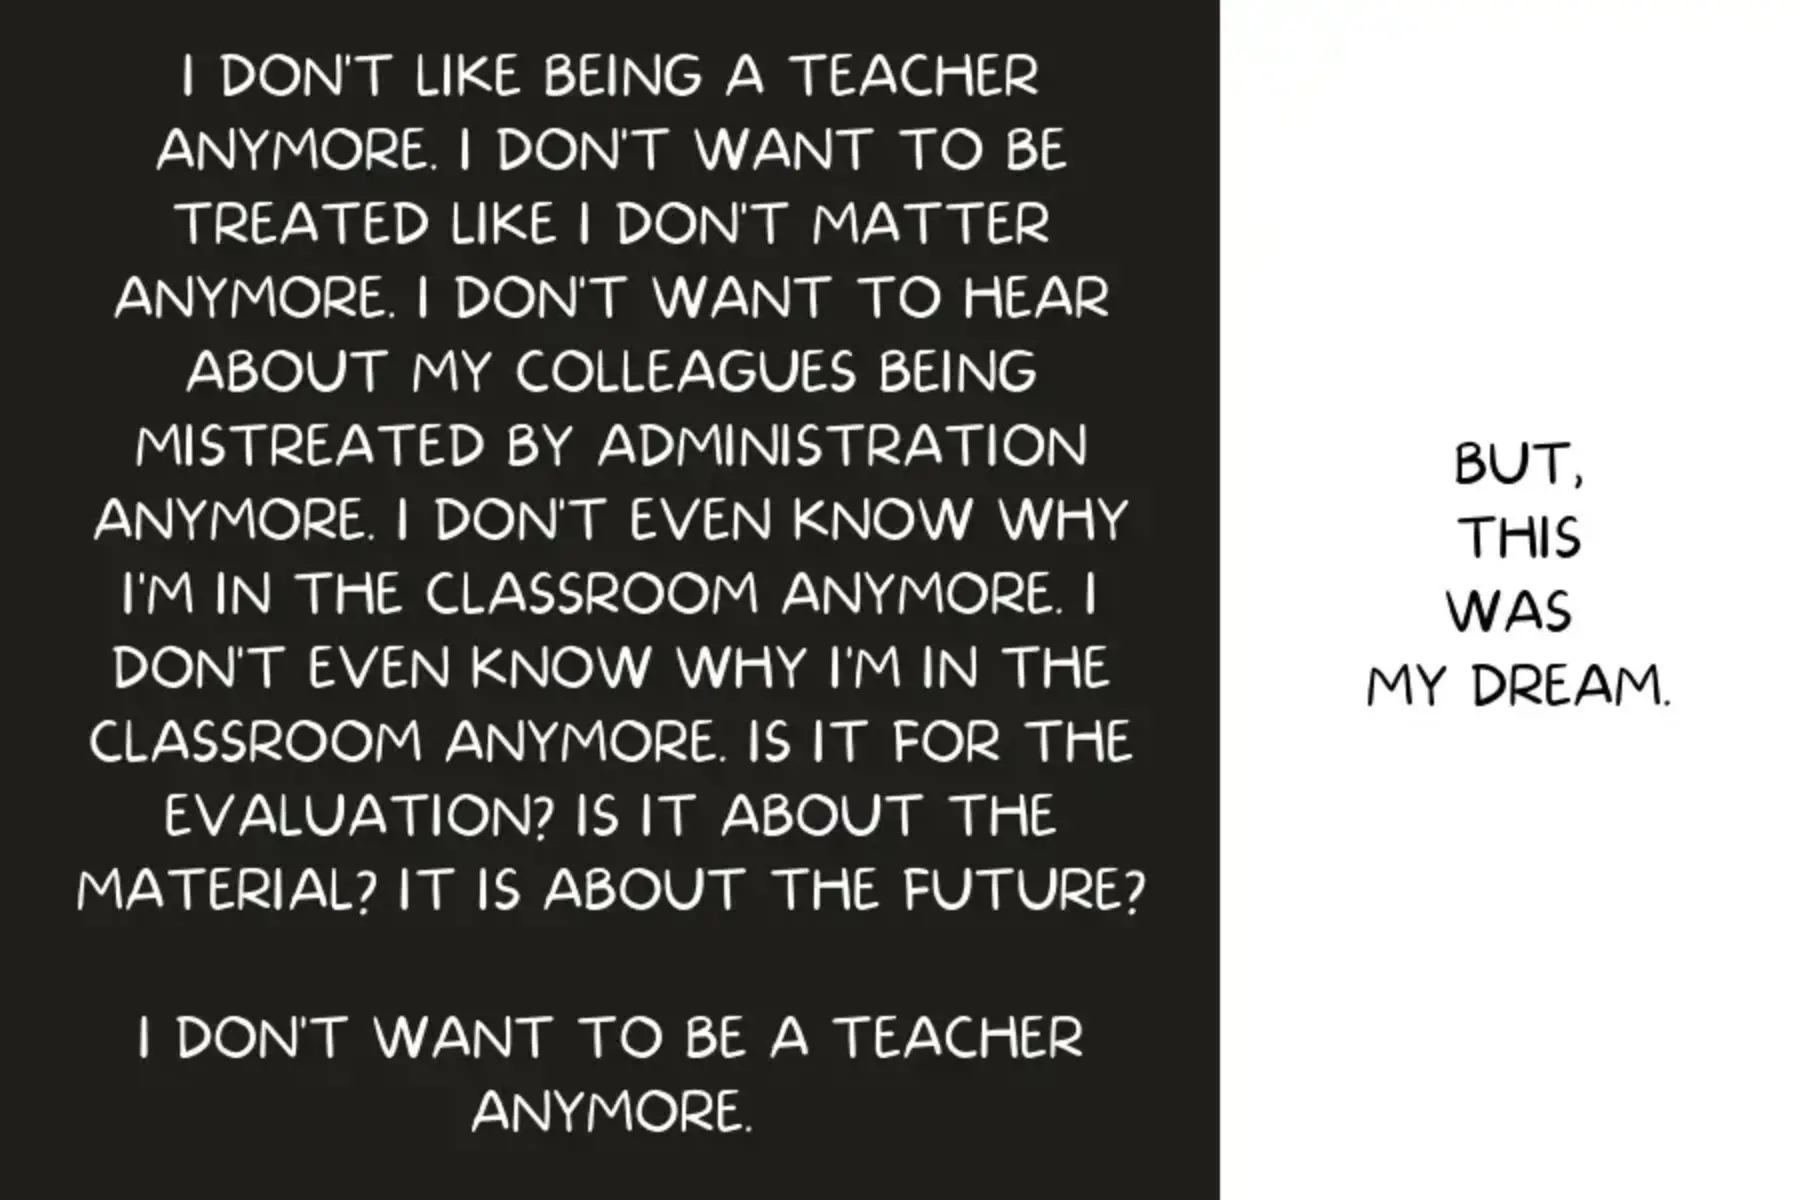 Black background and white text to the left. Text reads I DON'T LIKE BEING A TEACHER ANYMORE. I DON'T WANT TO BE TREATED LIKE I DON'T MATTER ANYMORE. I DON'T WANT TO HEAR ABOUT MY COLLEAGUES BEING MISTREATED BY ADMINISTRATION ANYMORE. I DON'T EVEN KNOW WHY I'M IN THE CLASSROOM ANYMORE. I DON'T EVEN KNOW WHY I'M IN THE CLASSROOM ANYMORE. IS IT FOR THE EVALUATION? IS IT ABOUT THE MATERIAL? IT IS ABOUT THE FUTURE? I DON'T WANT TO BE A TEACHER ANYMORE. White background and black text to the right that reads BUT, THIS WAS MY DREAM.